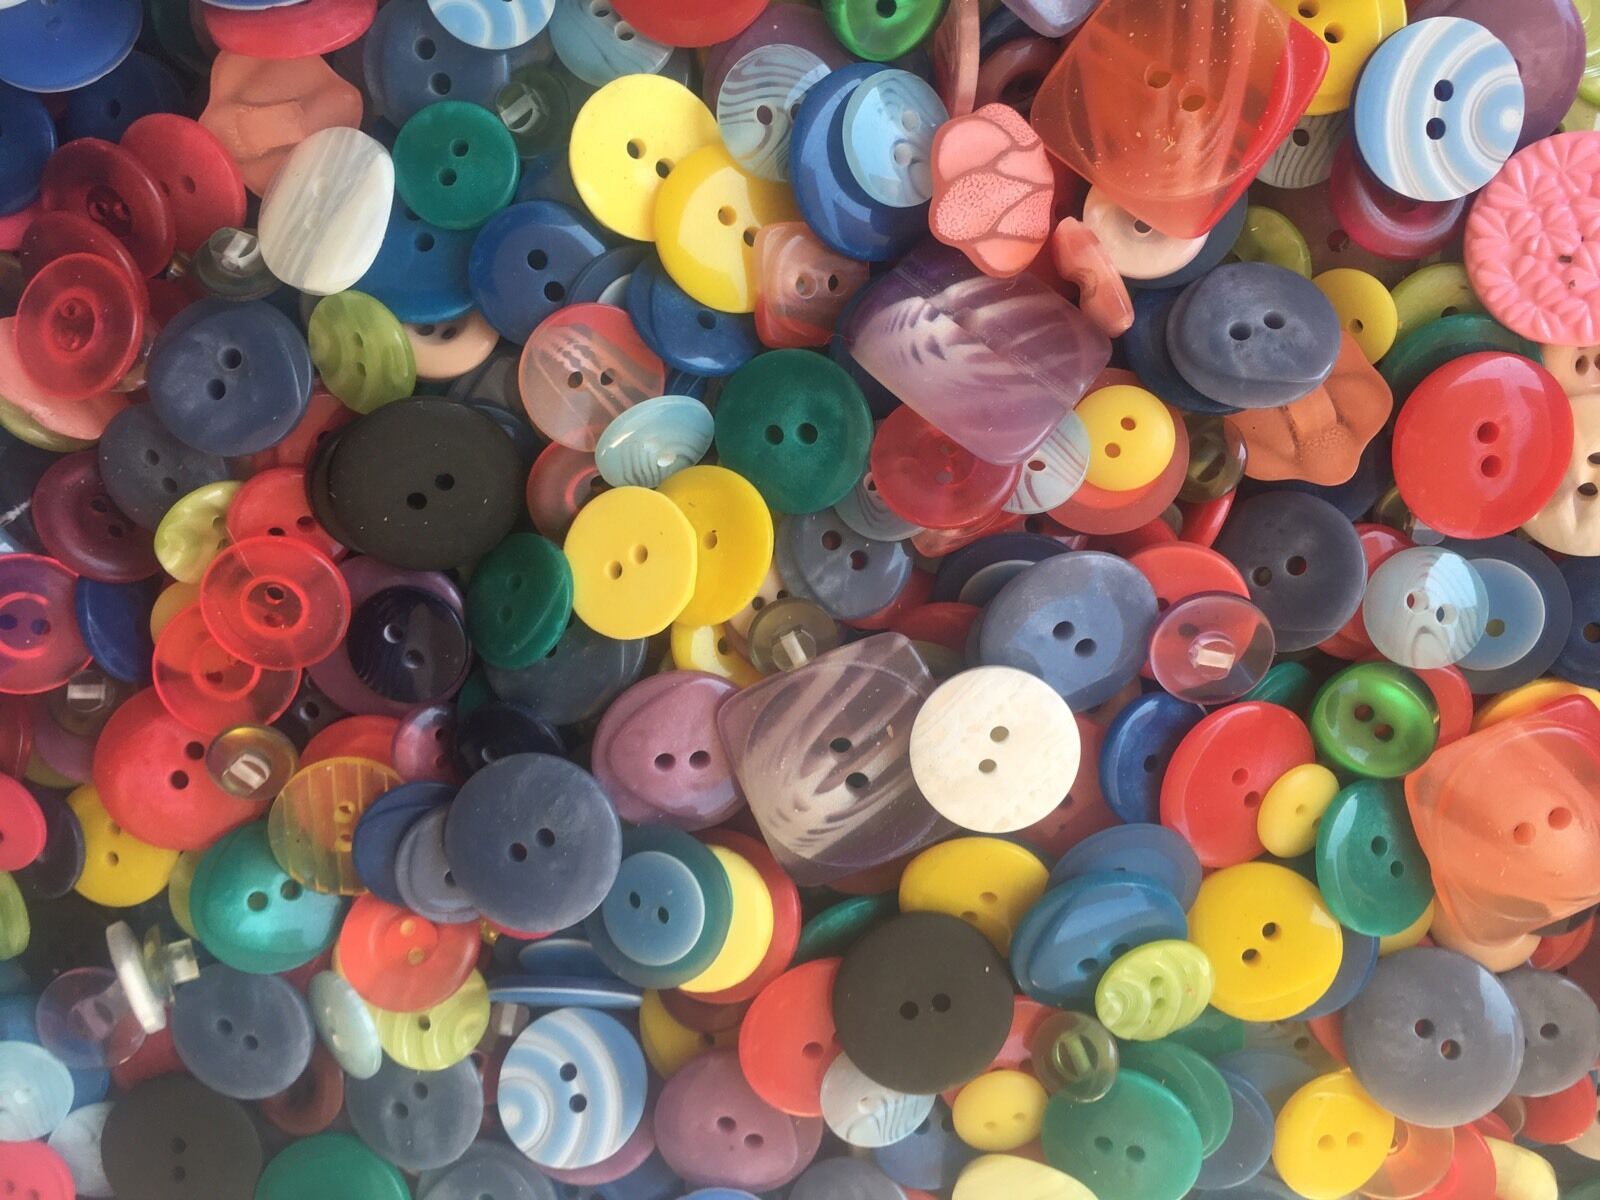 100 pc Mixed Lot Of All Types & Sizes Of Fun Colorful Buttons